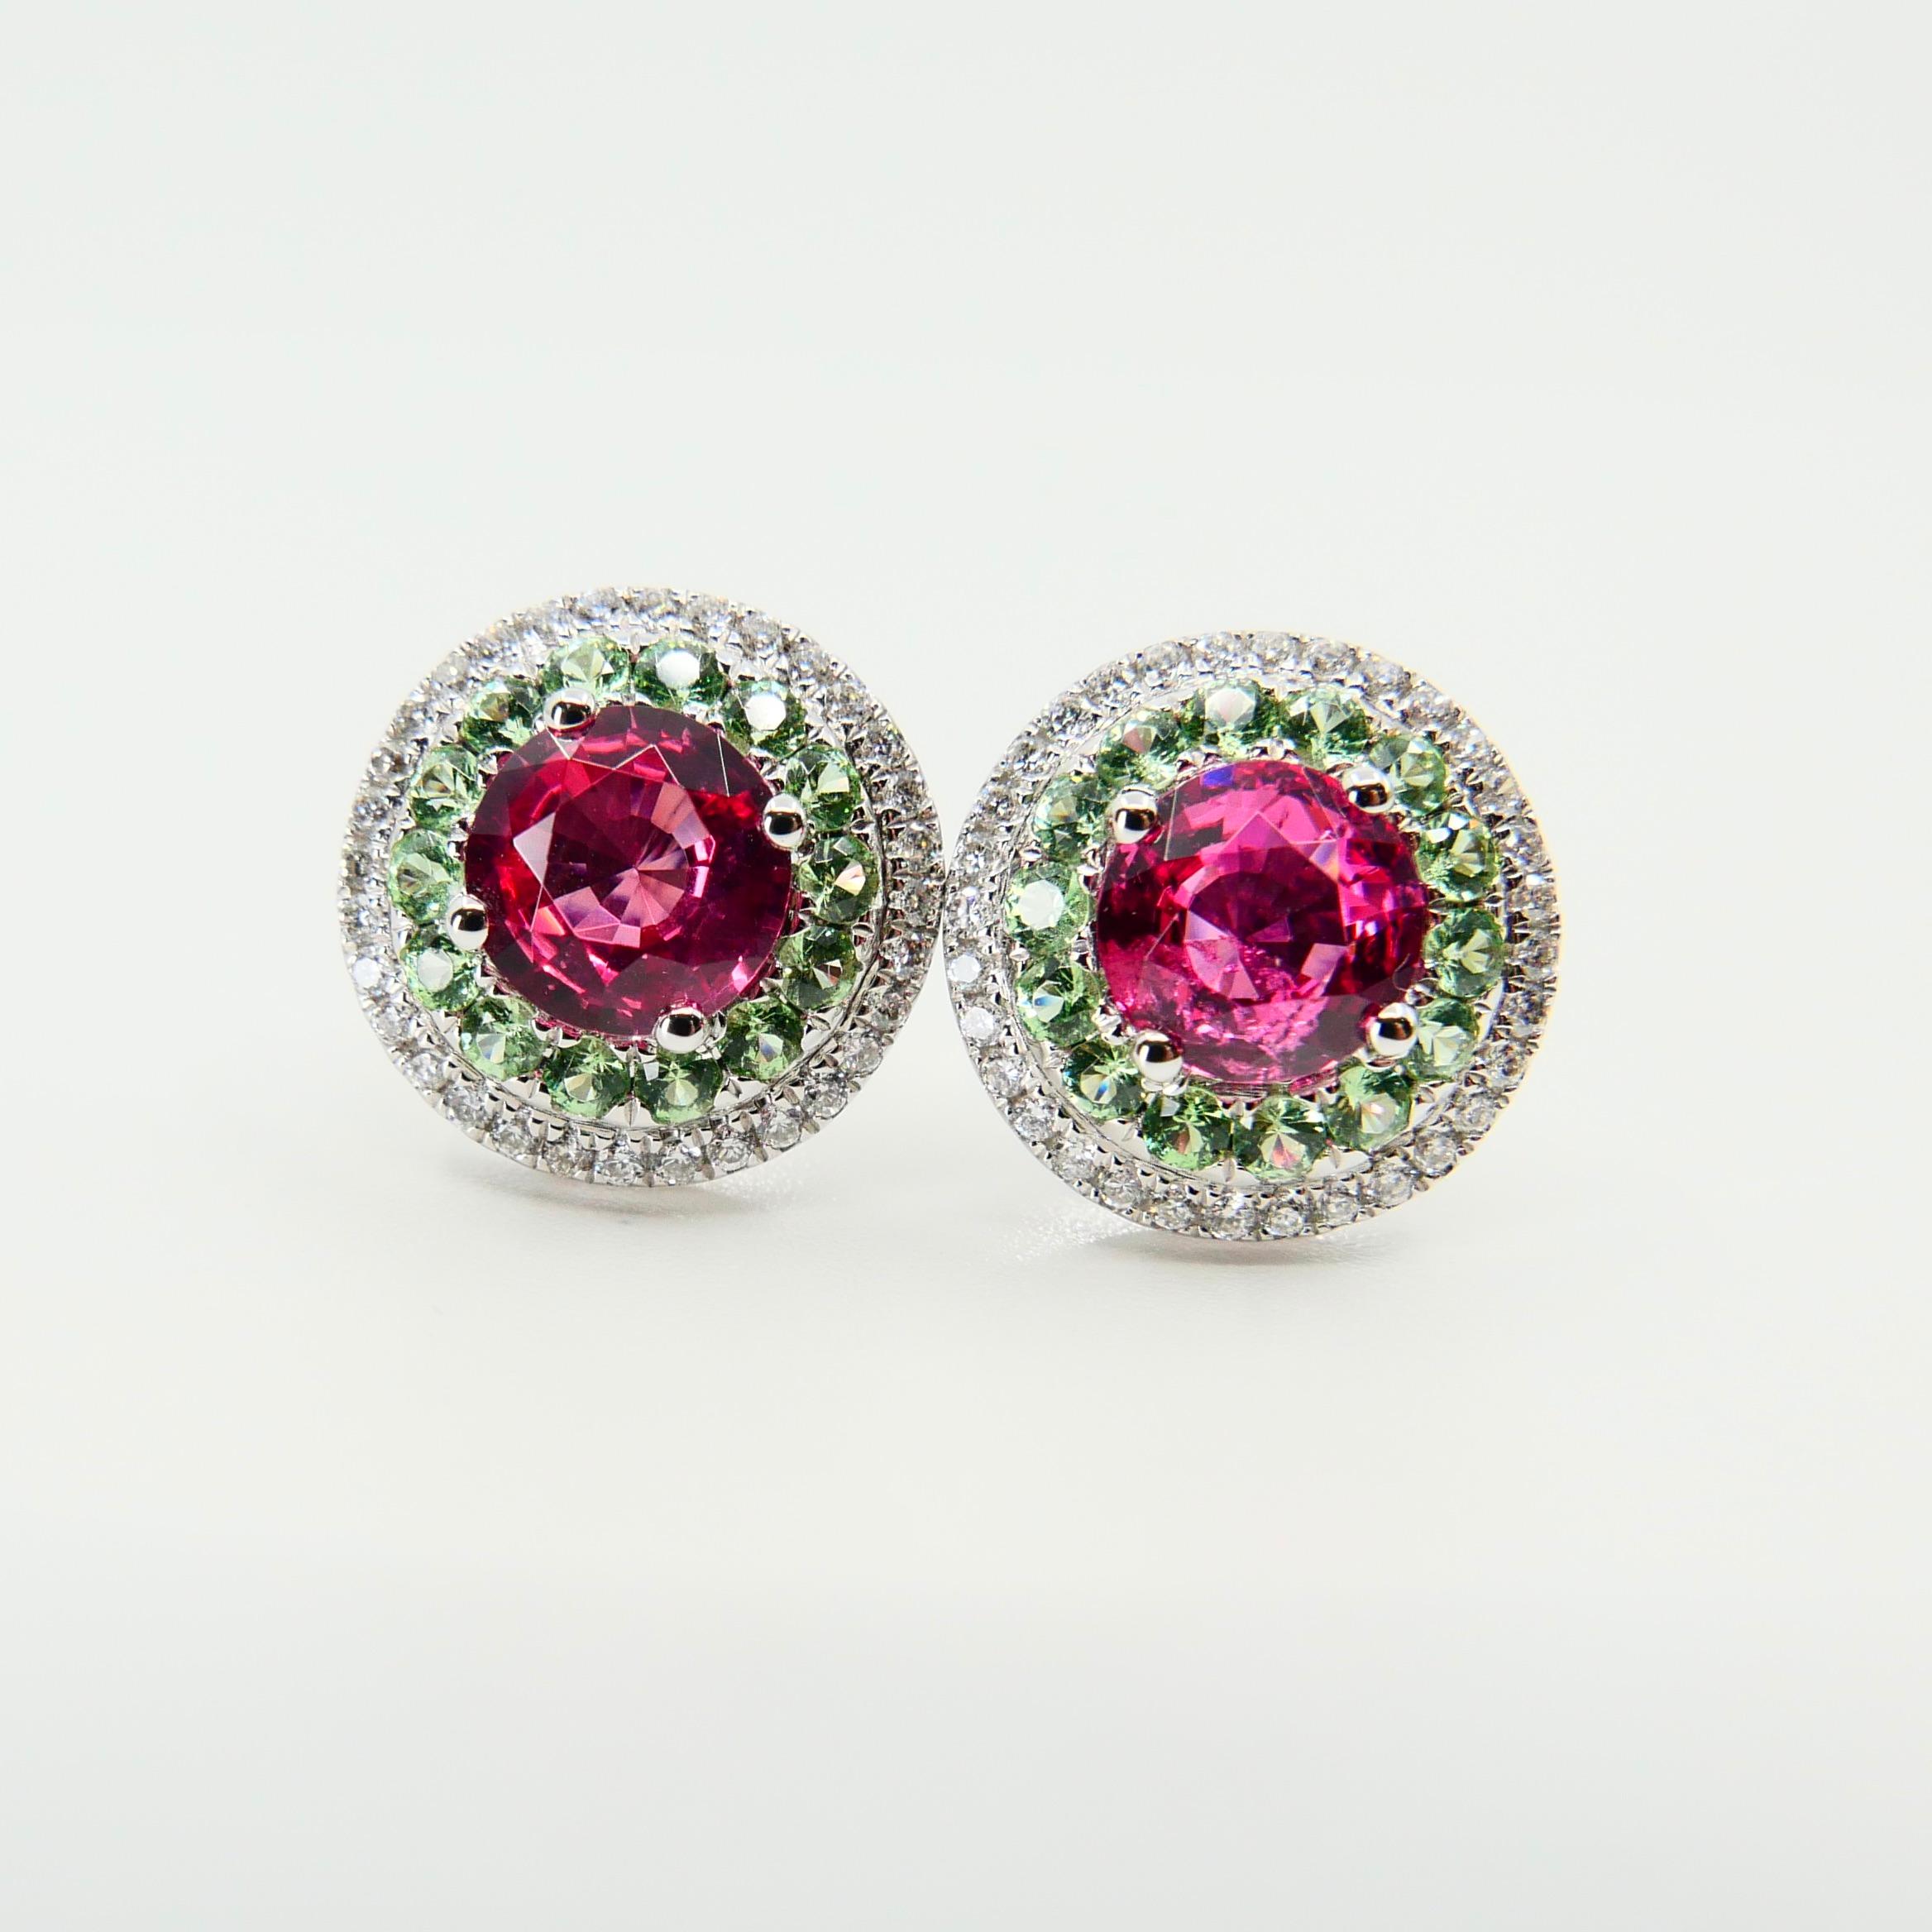 Natural 1.53 Carat Vivid Neon Pink Spinel Peridot and Diamond Earrings, 18k Gold 3